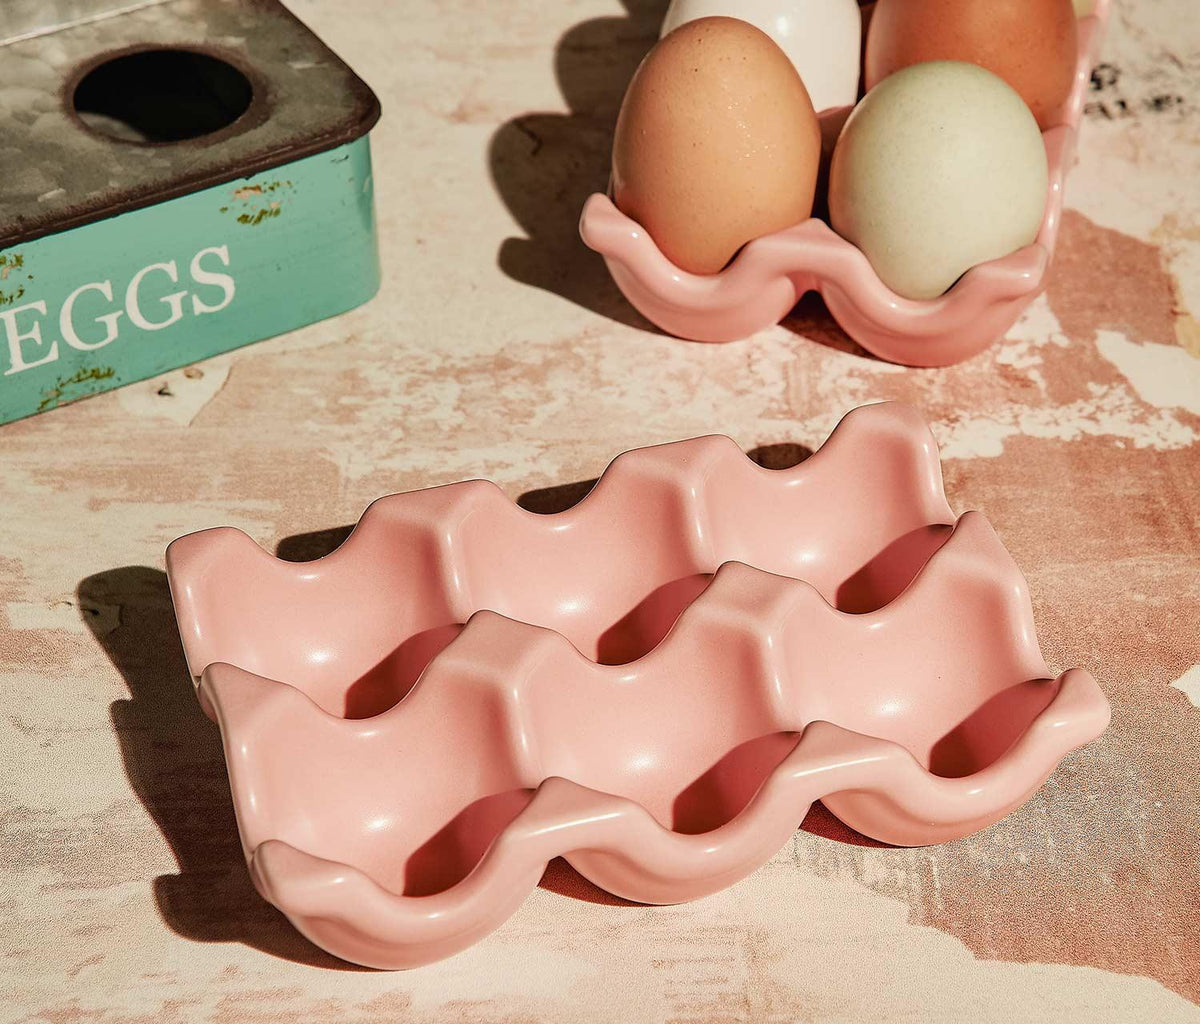 Cloud White 6 Cup Ceramic Egg Crate/Tray Set